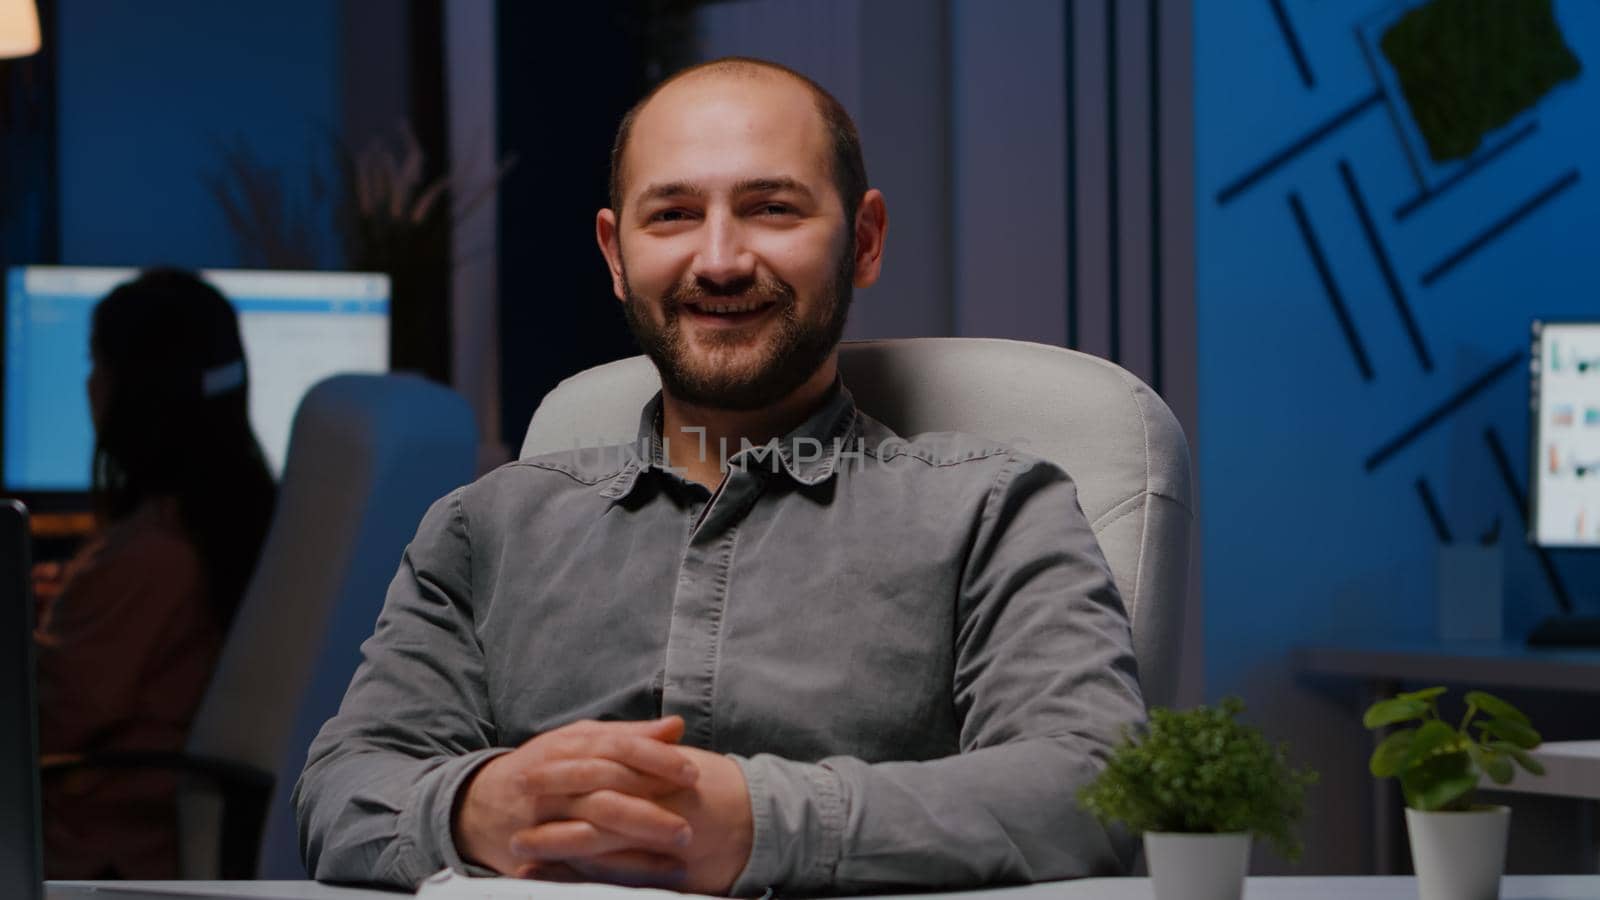 Portrait of smiling businessman sitting at desk table in business company office late at night looking into camera. Executive manager working at marketing statistics planning financial strategy